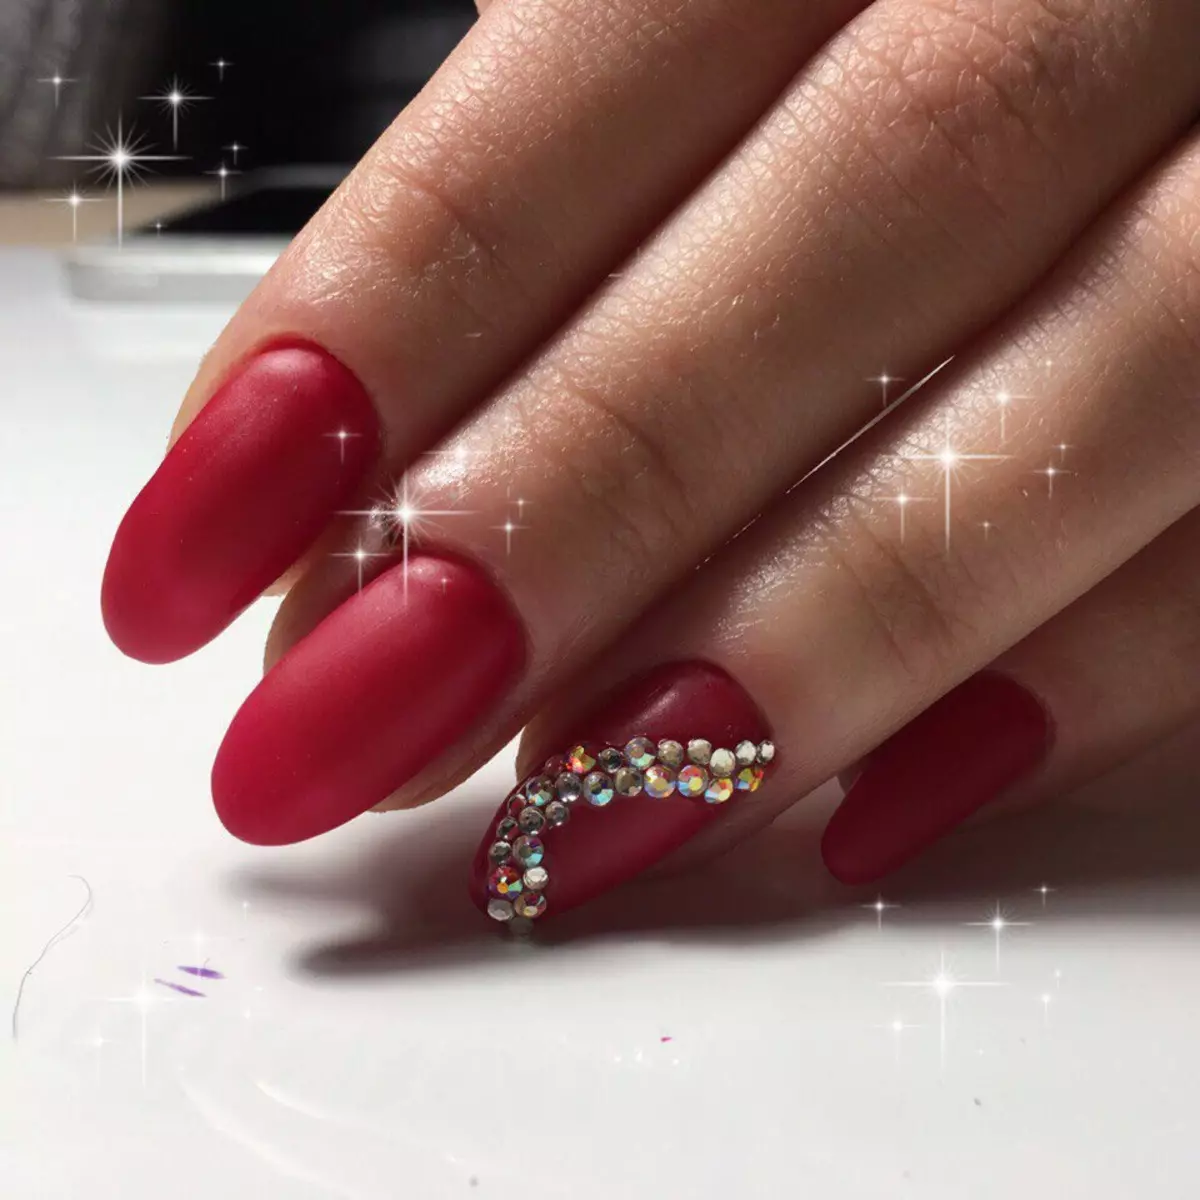 Red manicure with rhinestones (60 photos): Beautiful matte red nail design ideas with stones 24417_5